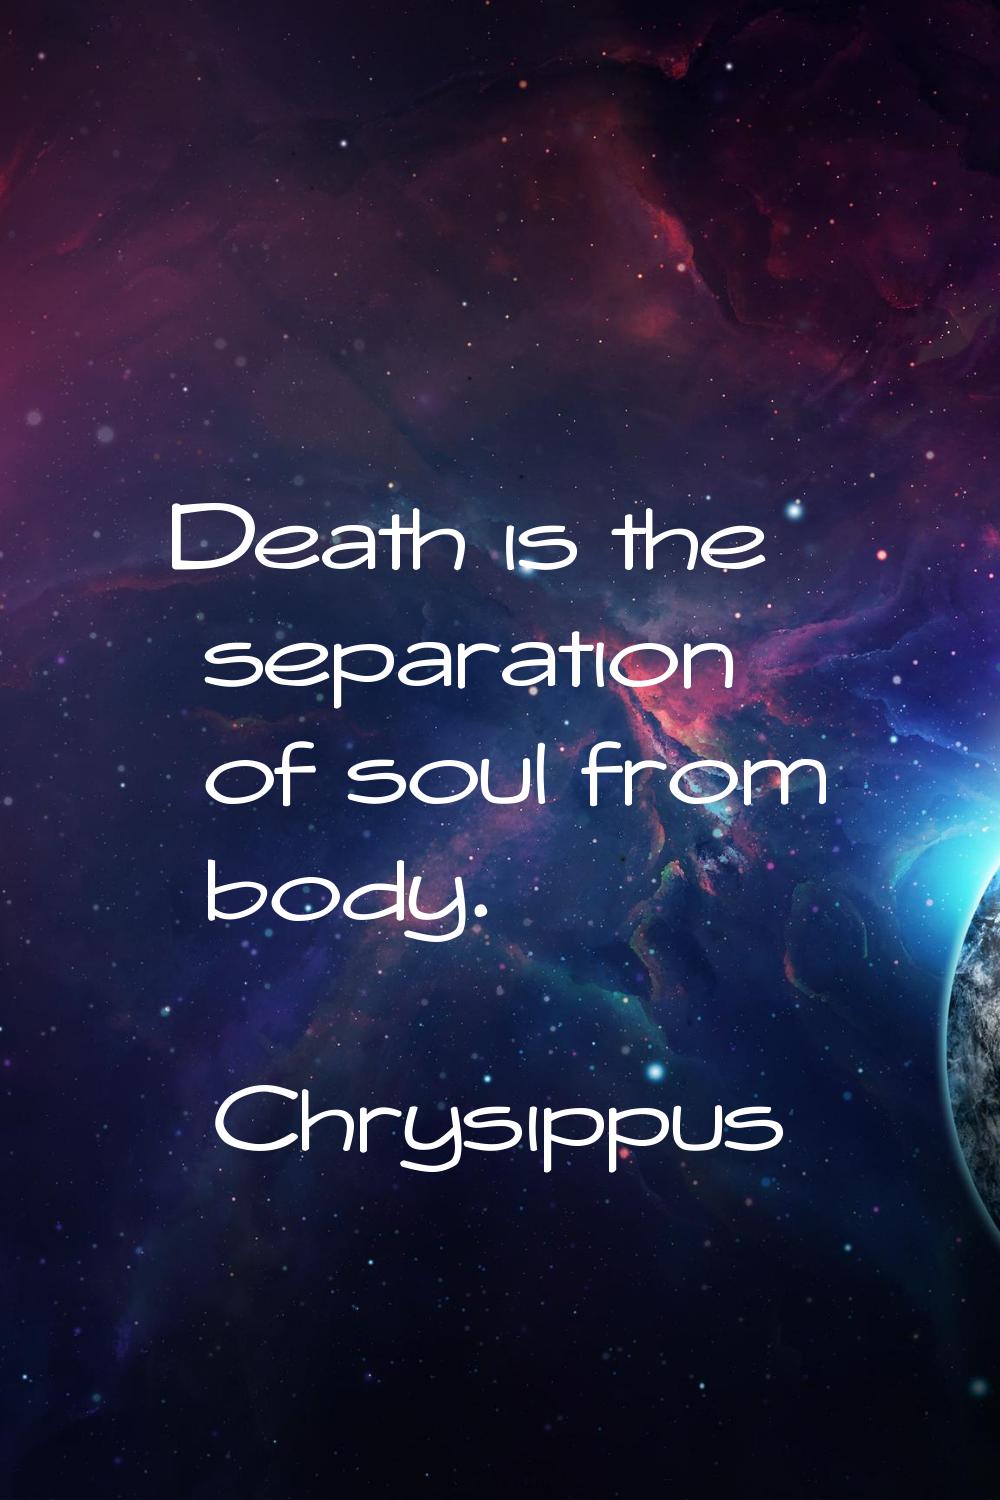 Death is the separation of soul from body.